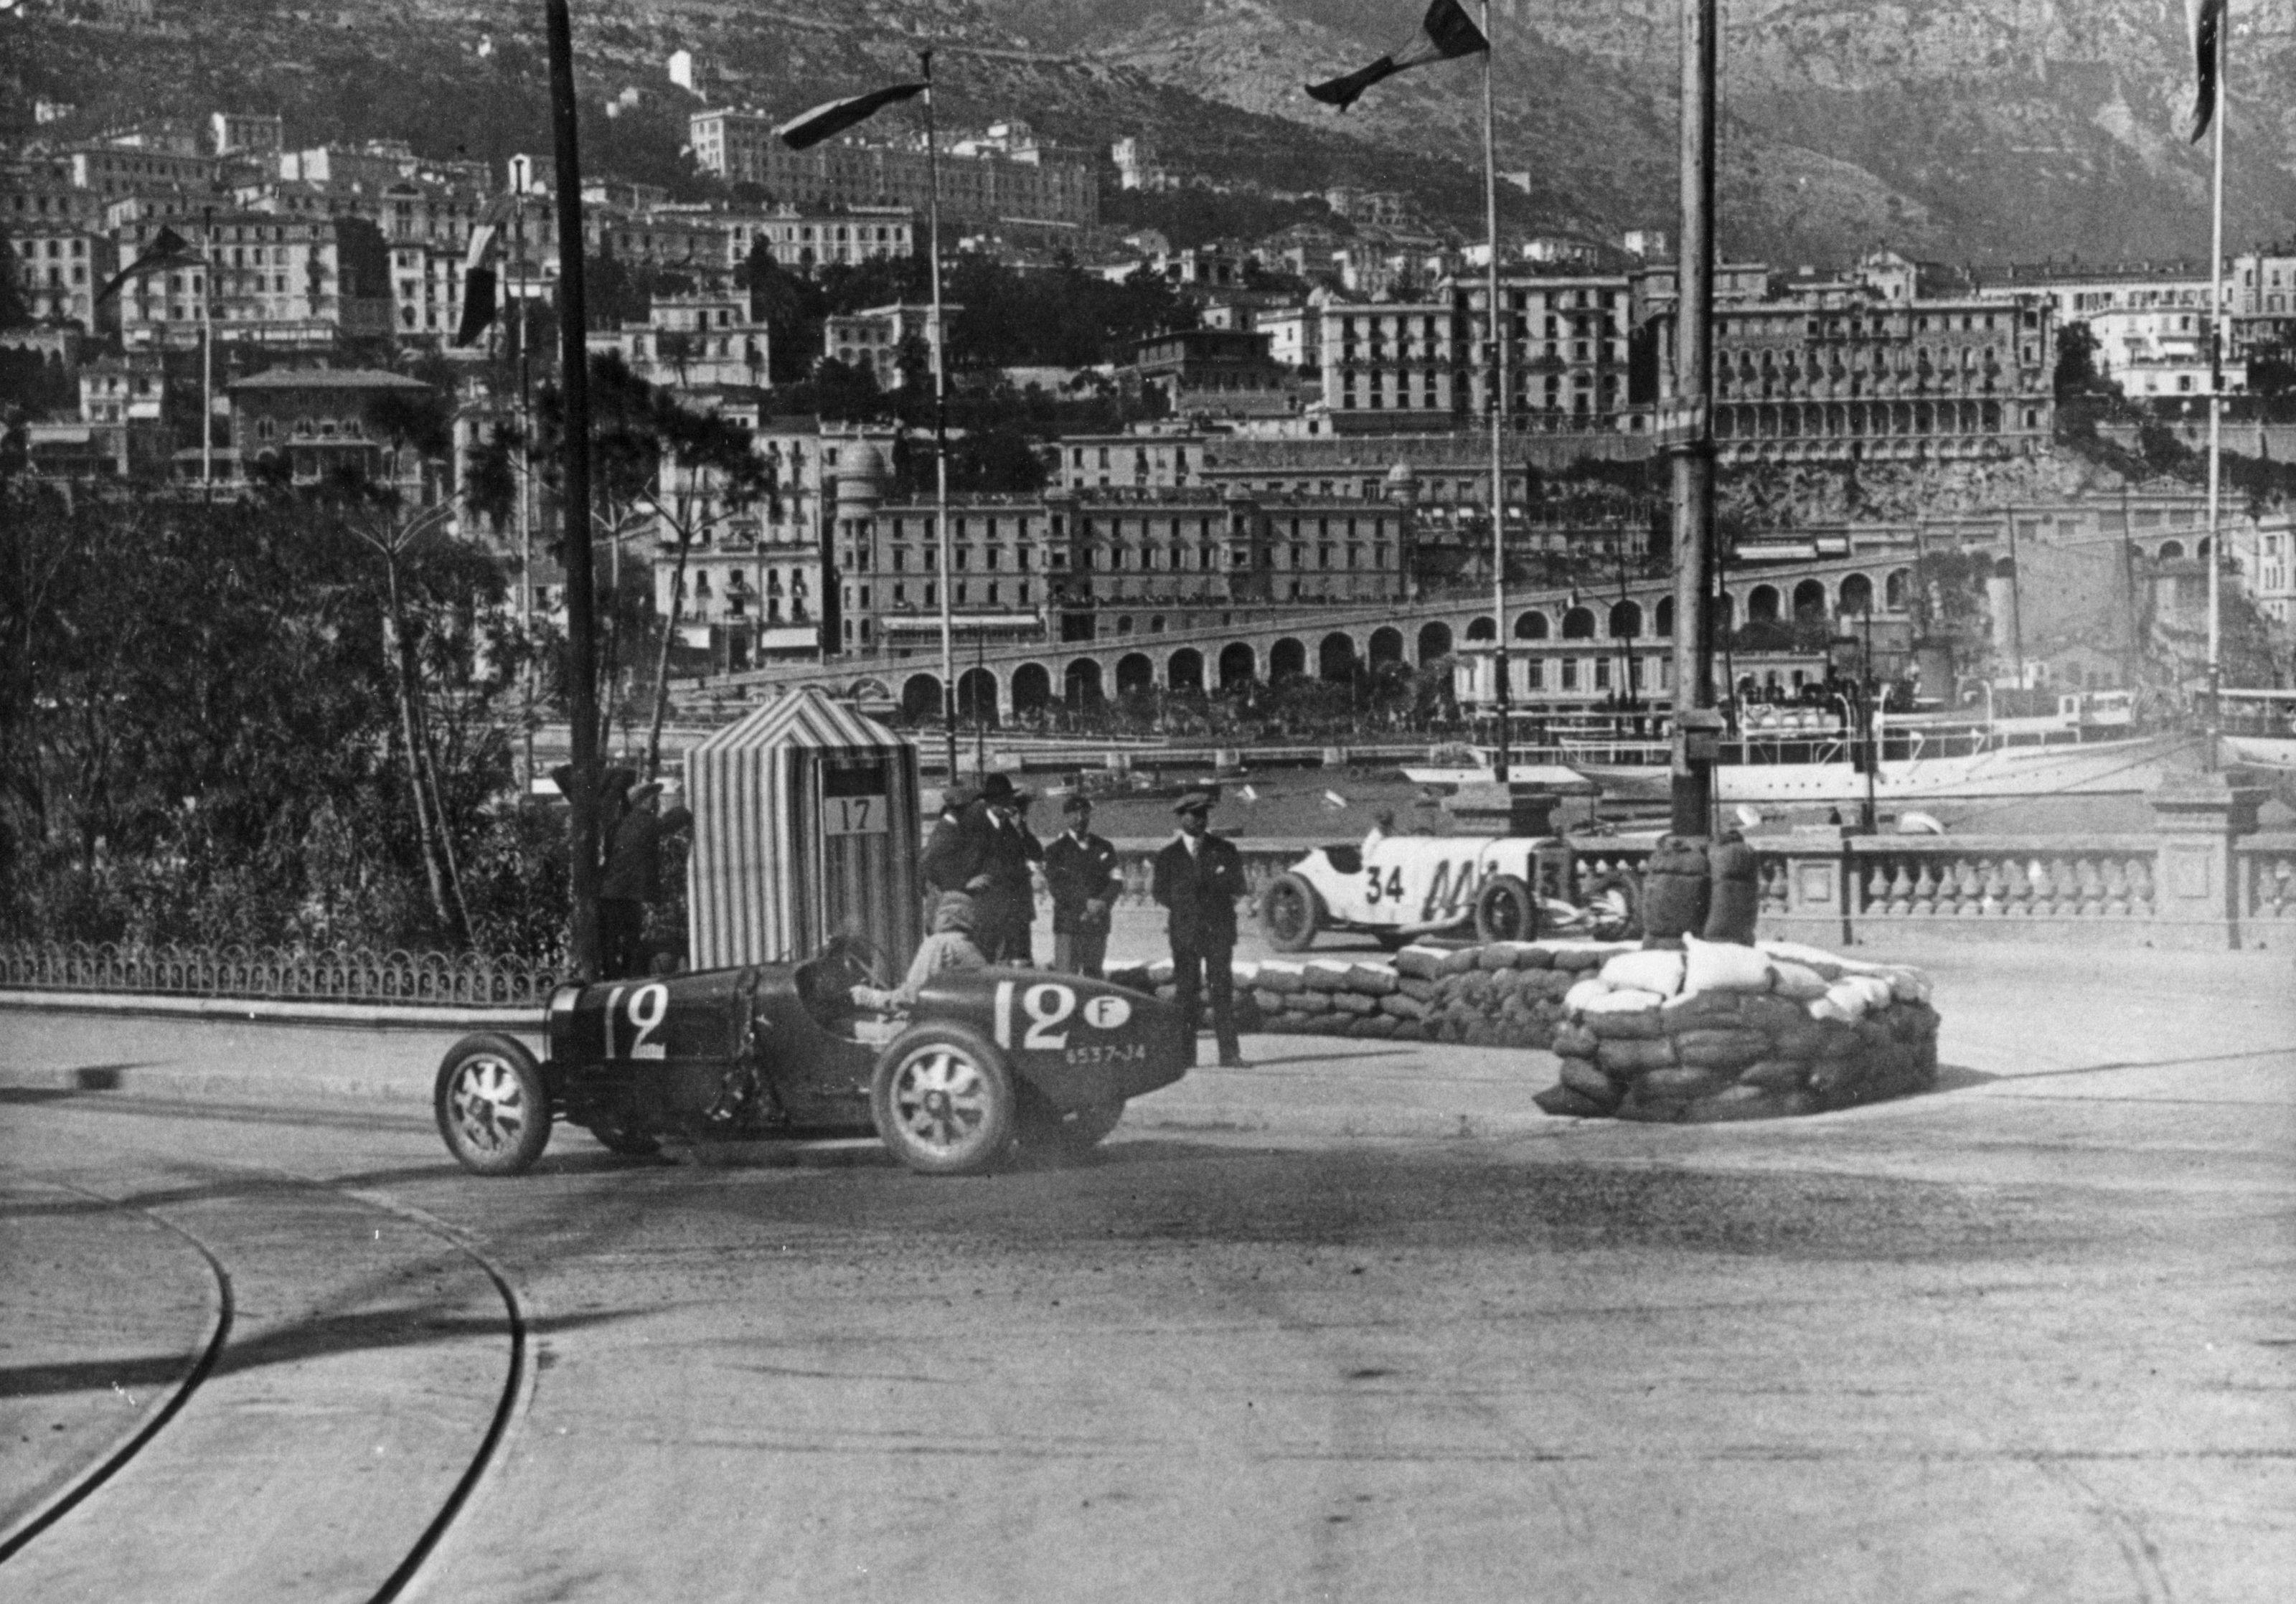 First victory at the First Grand Prix in Monaco in 1929